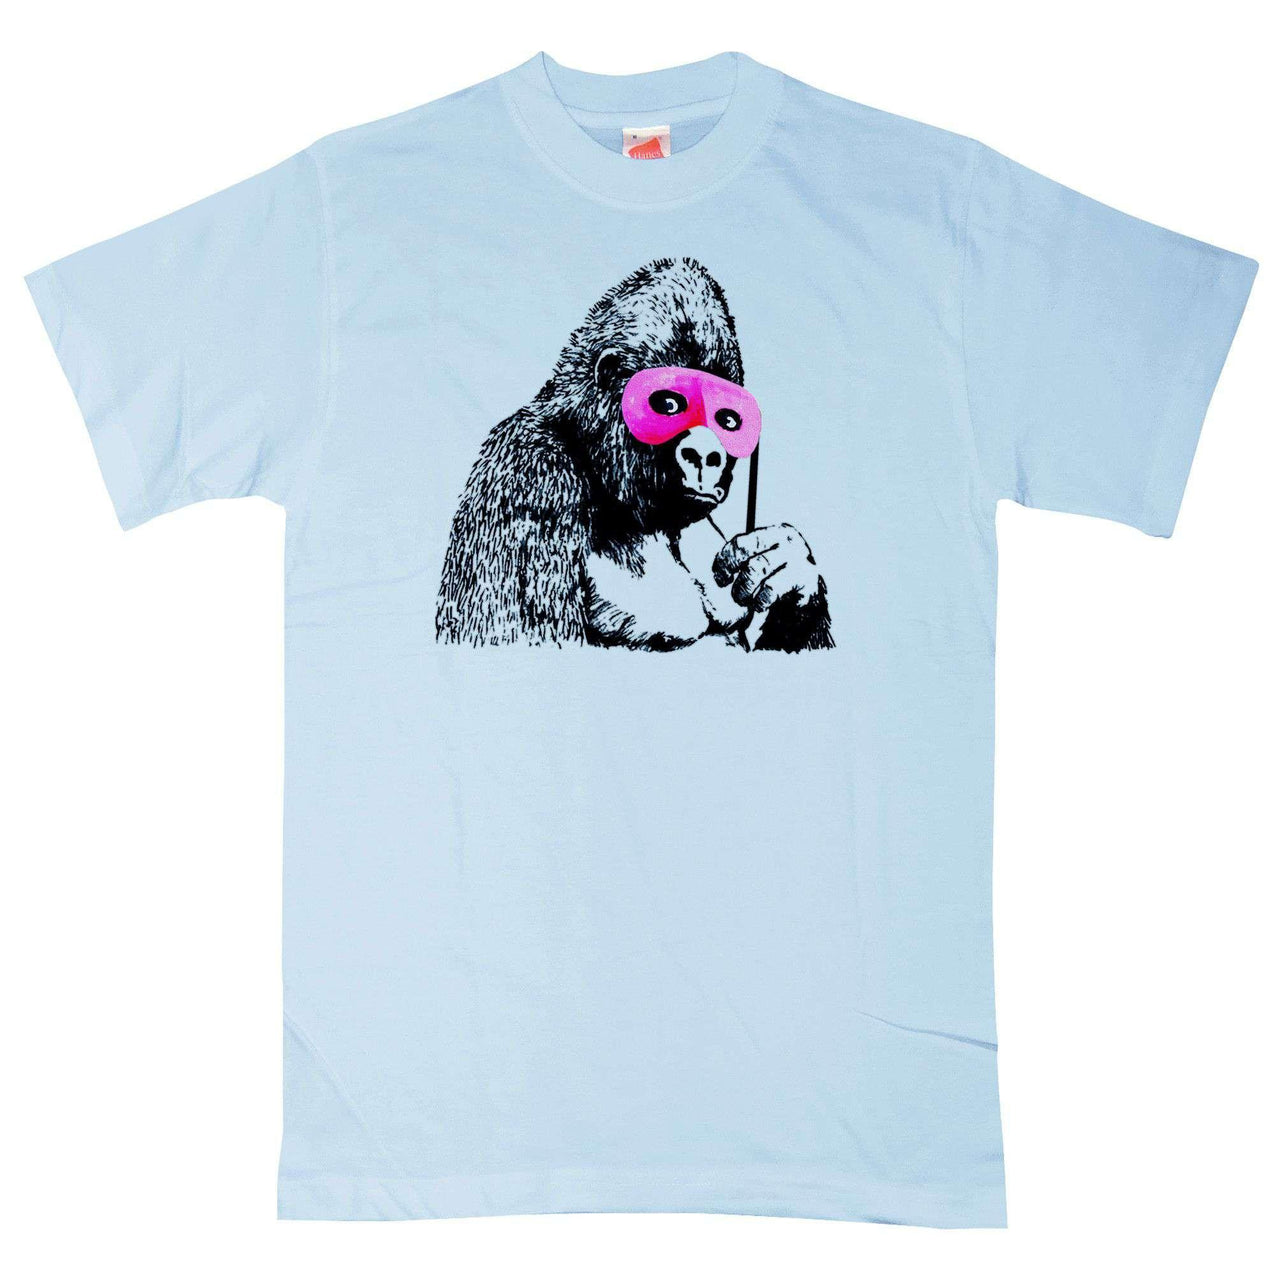 Banksy Gorilla With Mask Graphic T-Shirt For Men 8Ball